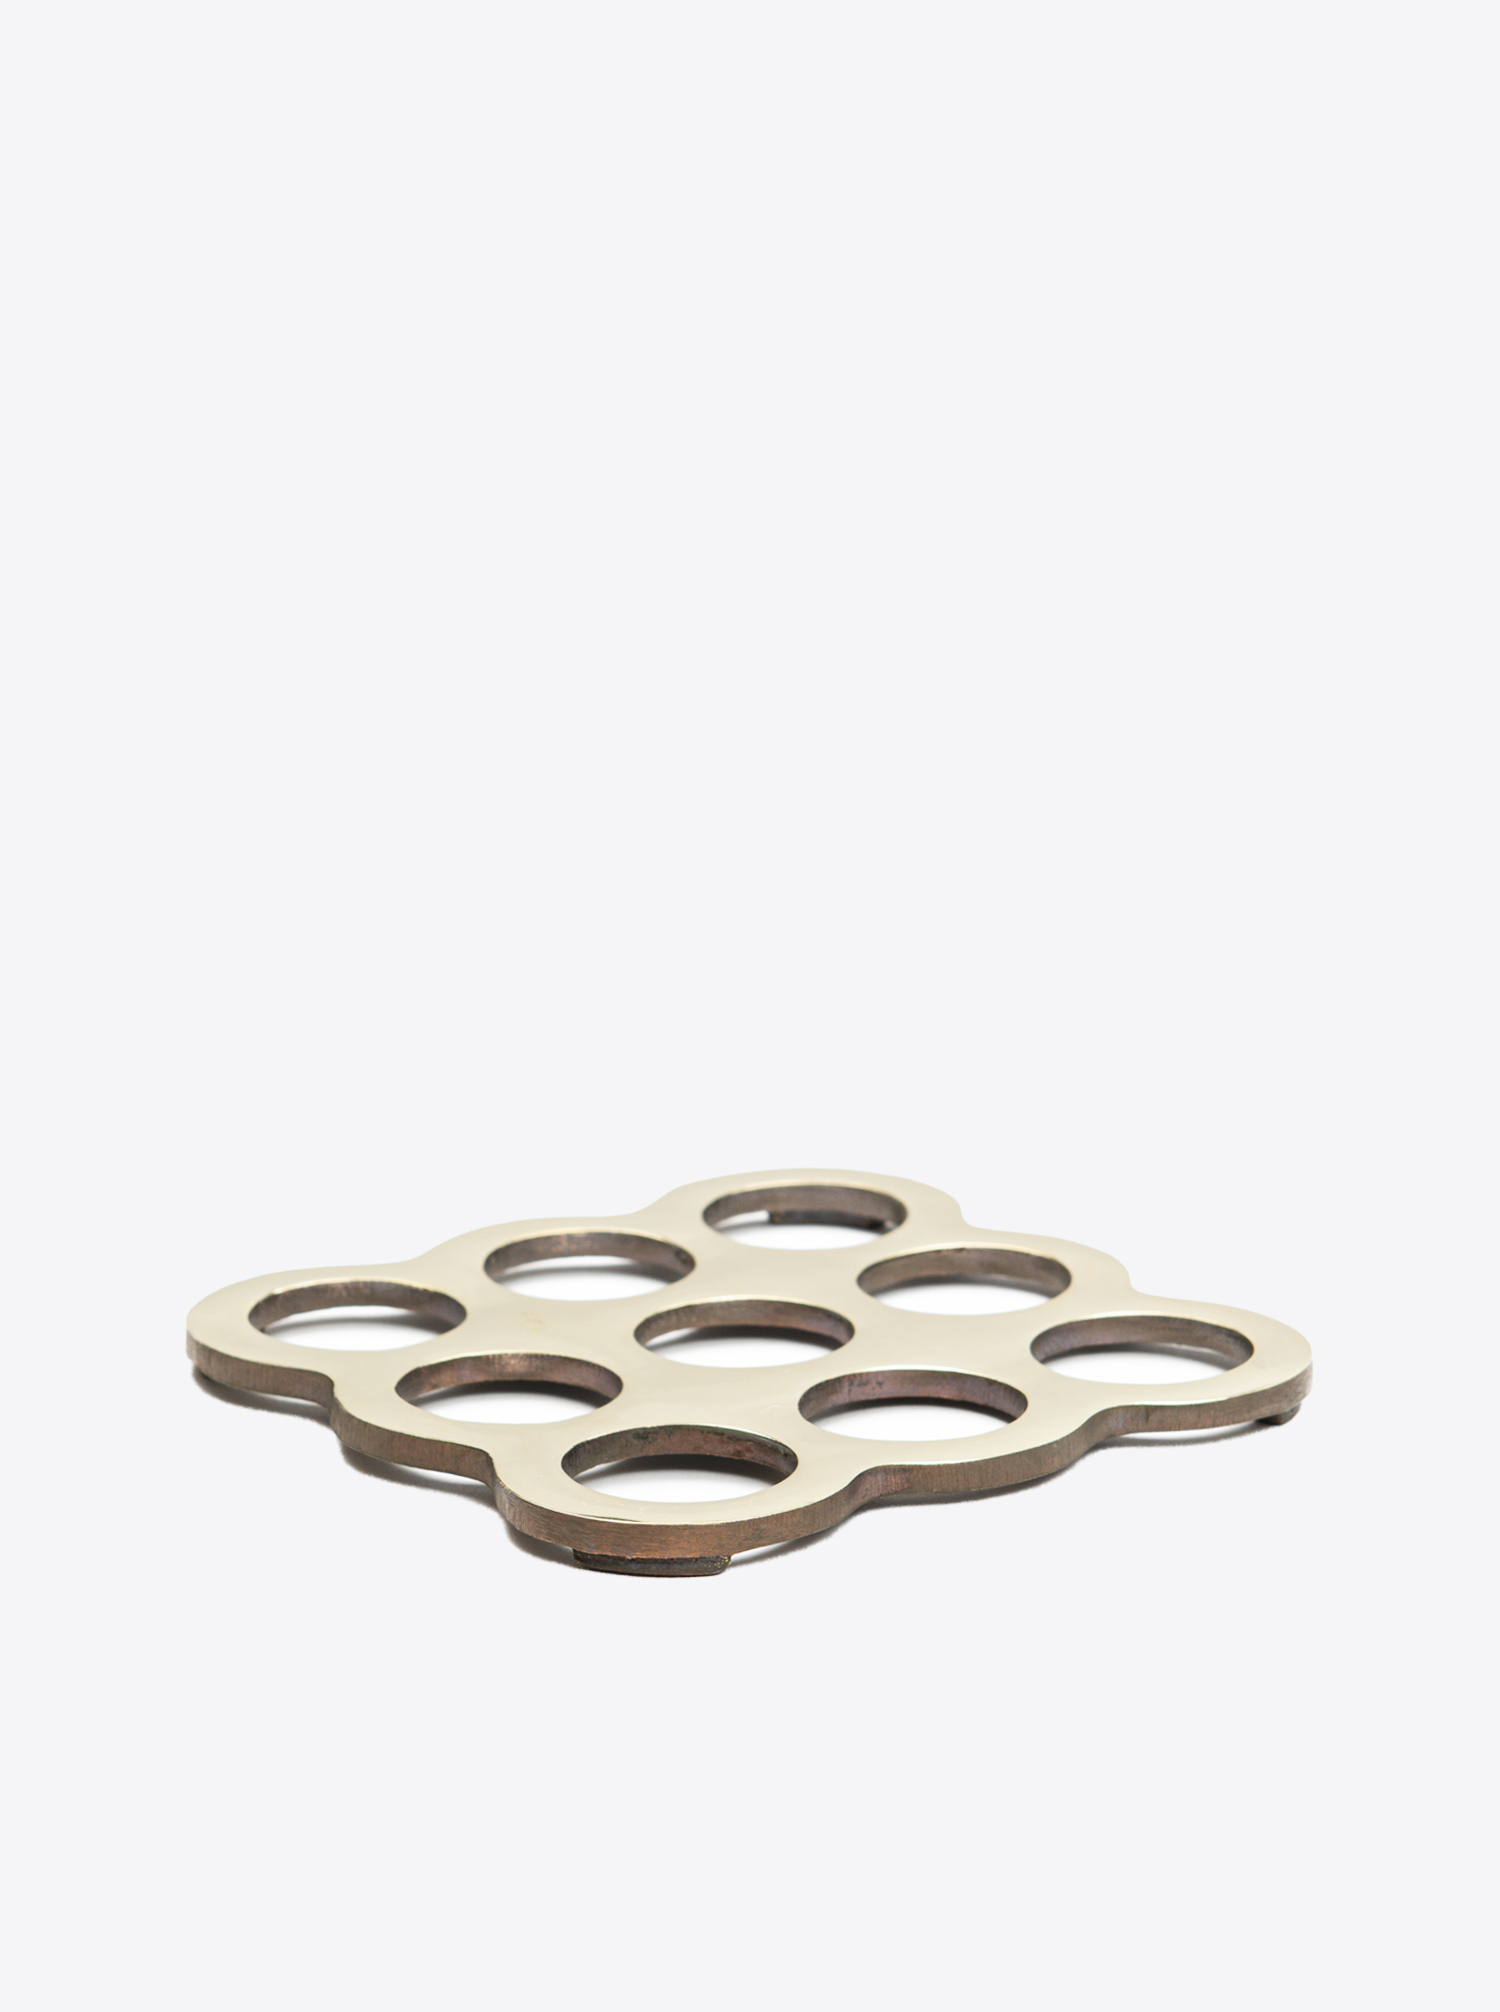 Trivet square polished and patinated brass